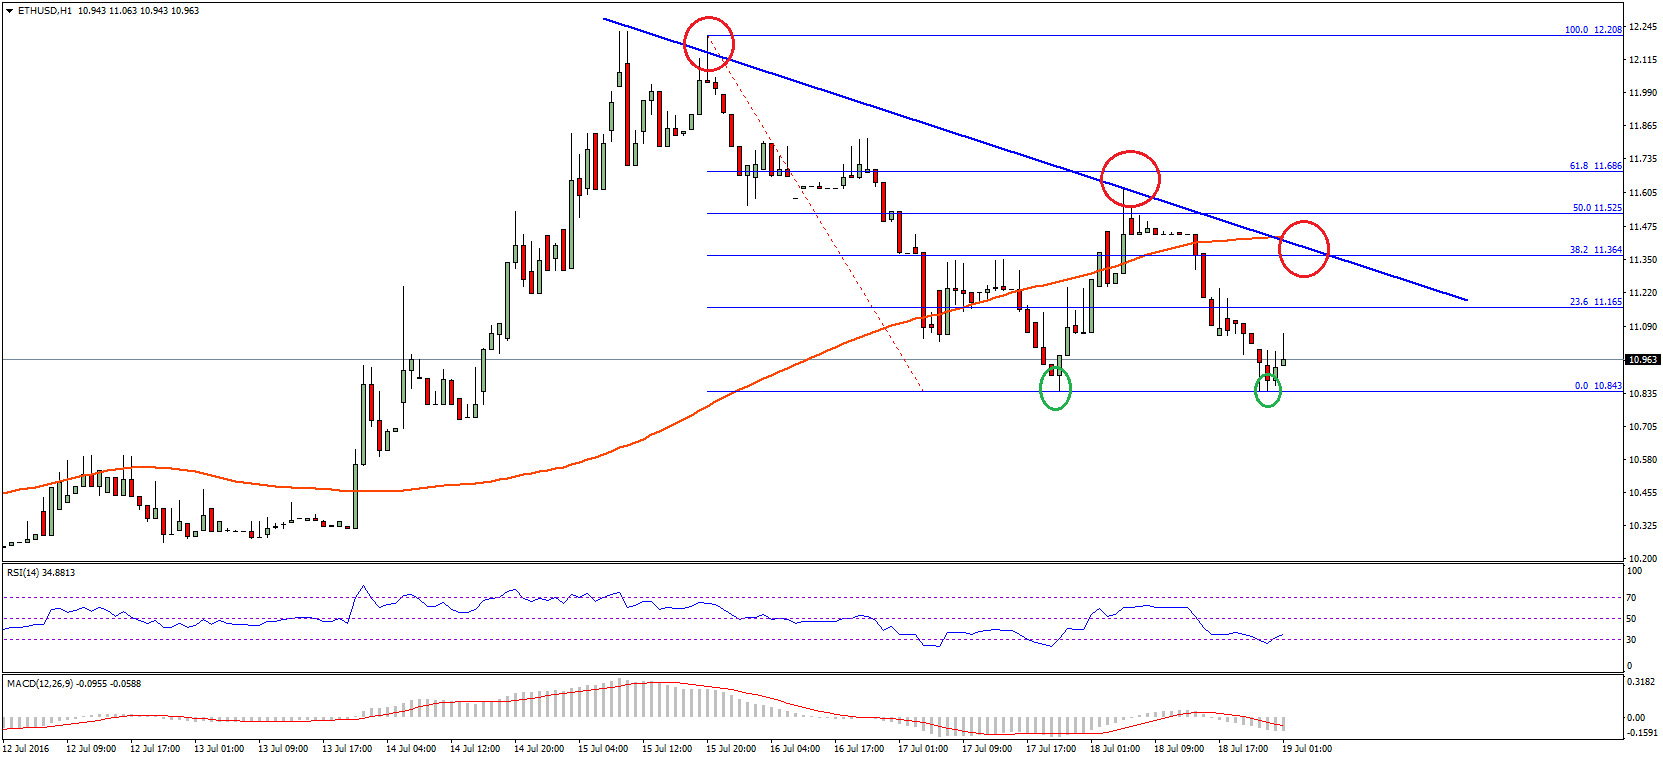 Ethereum Price Technical Analysis – Double Bottom Formation?